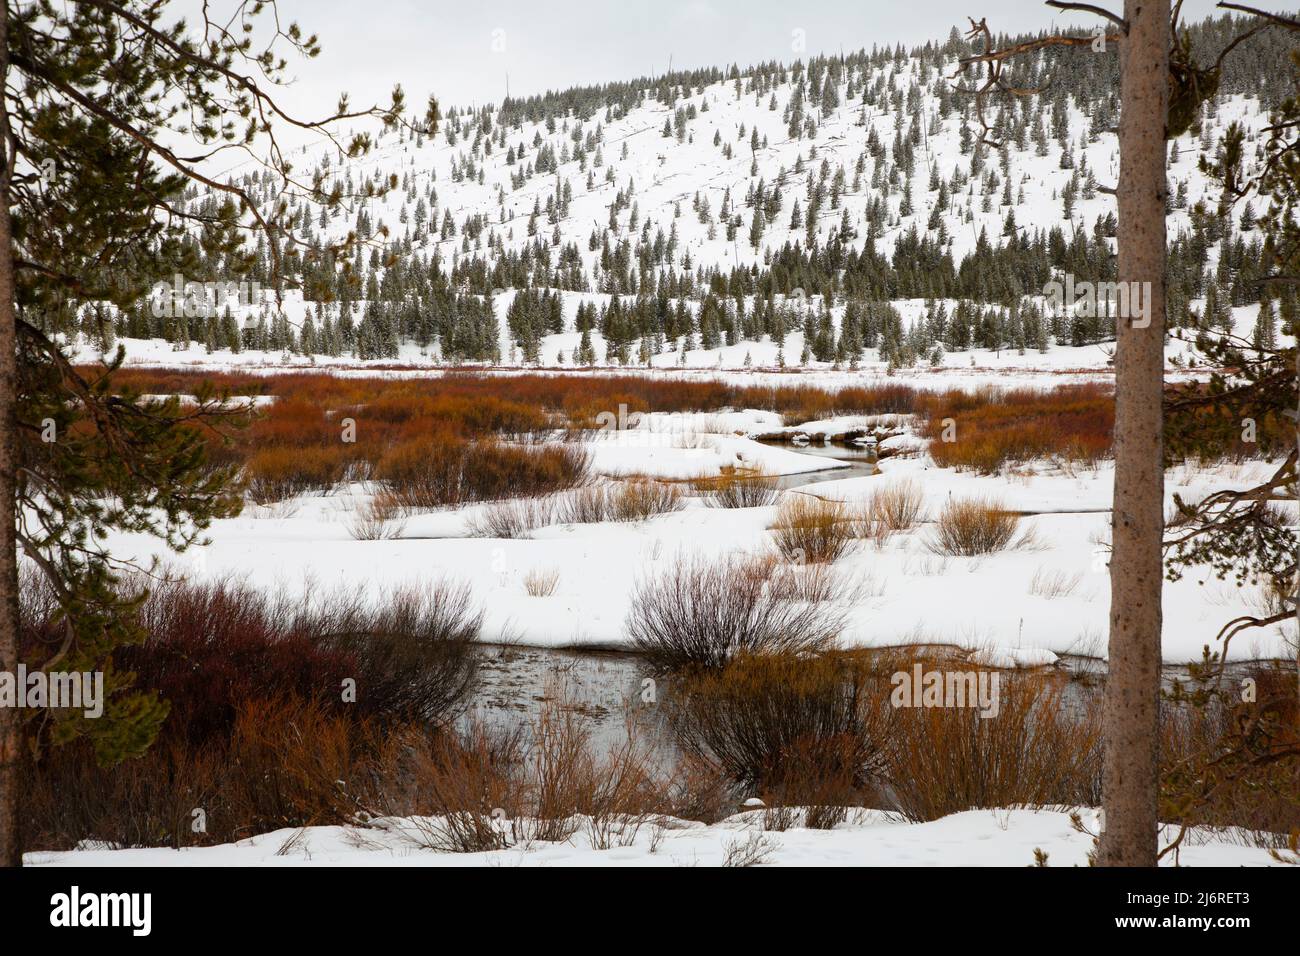 Willow Park, parc national de Yellowstone, Wyoming Banque D'Images